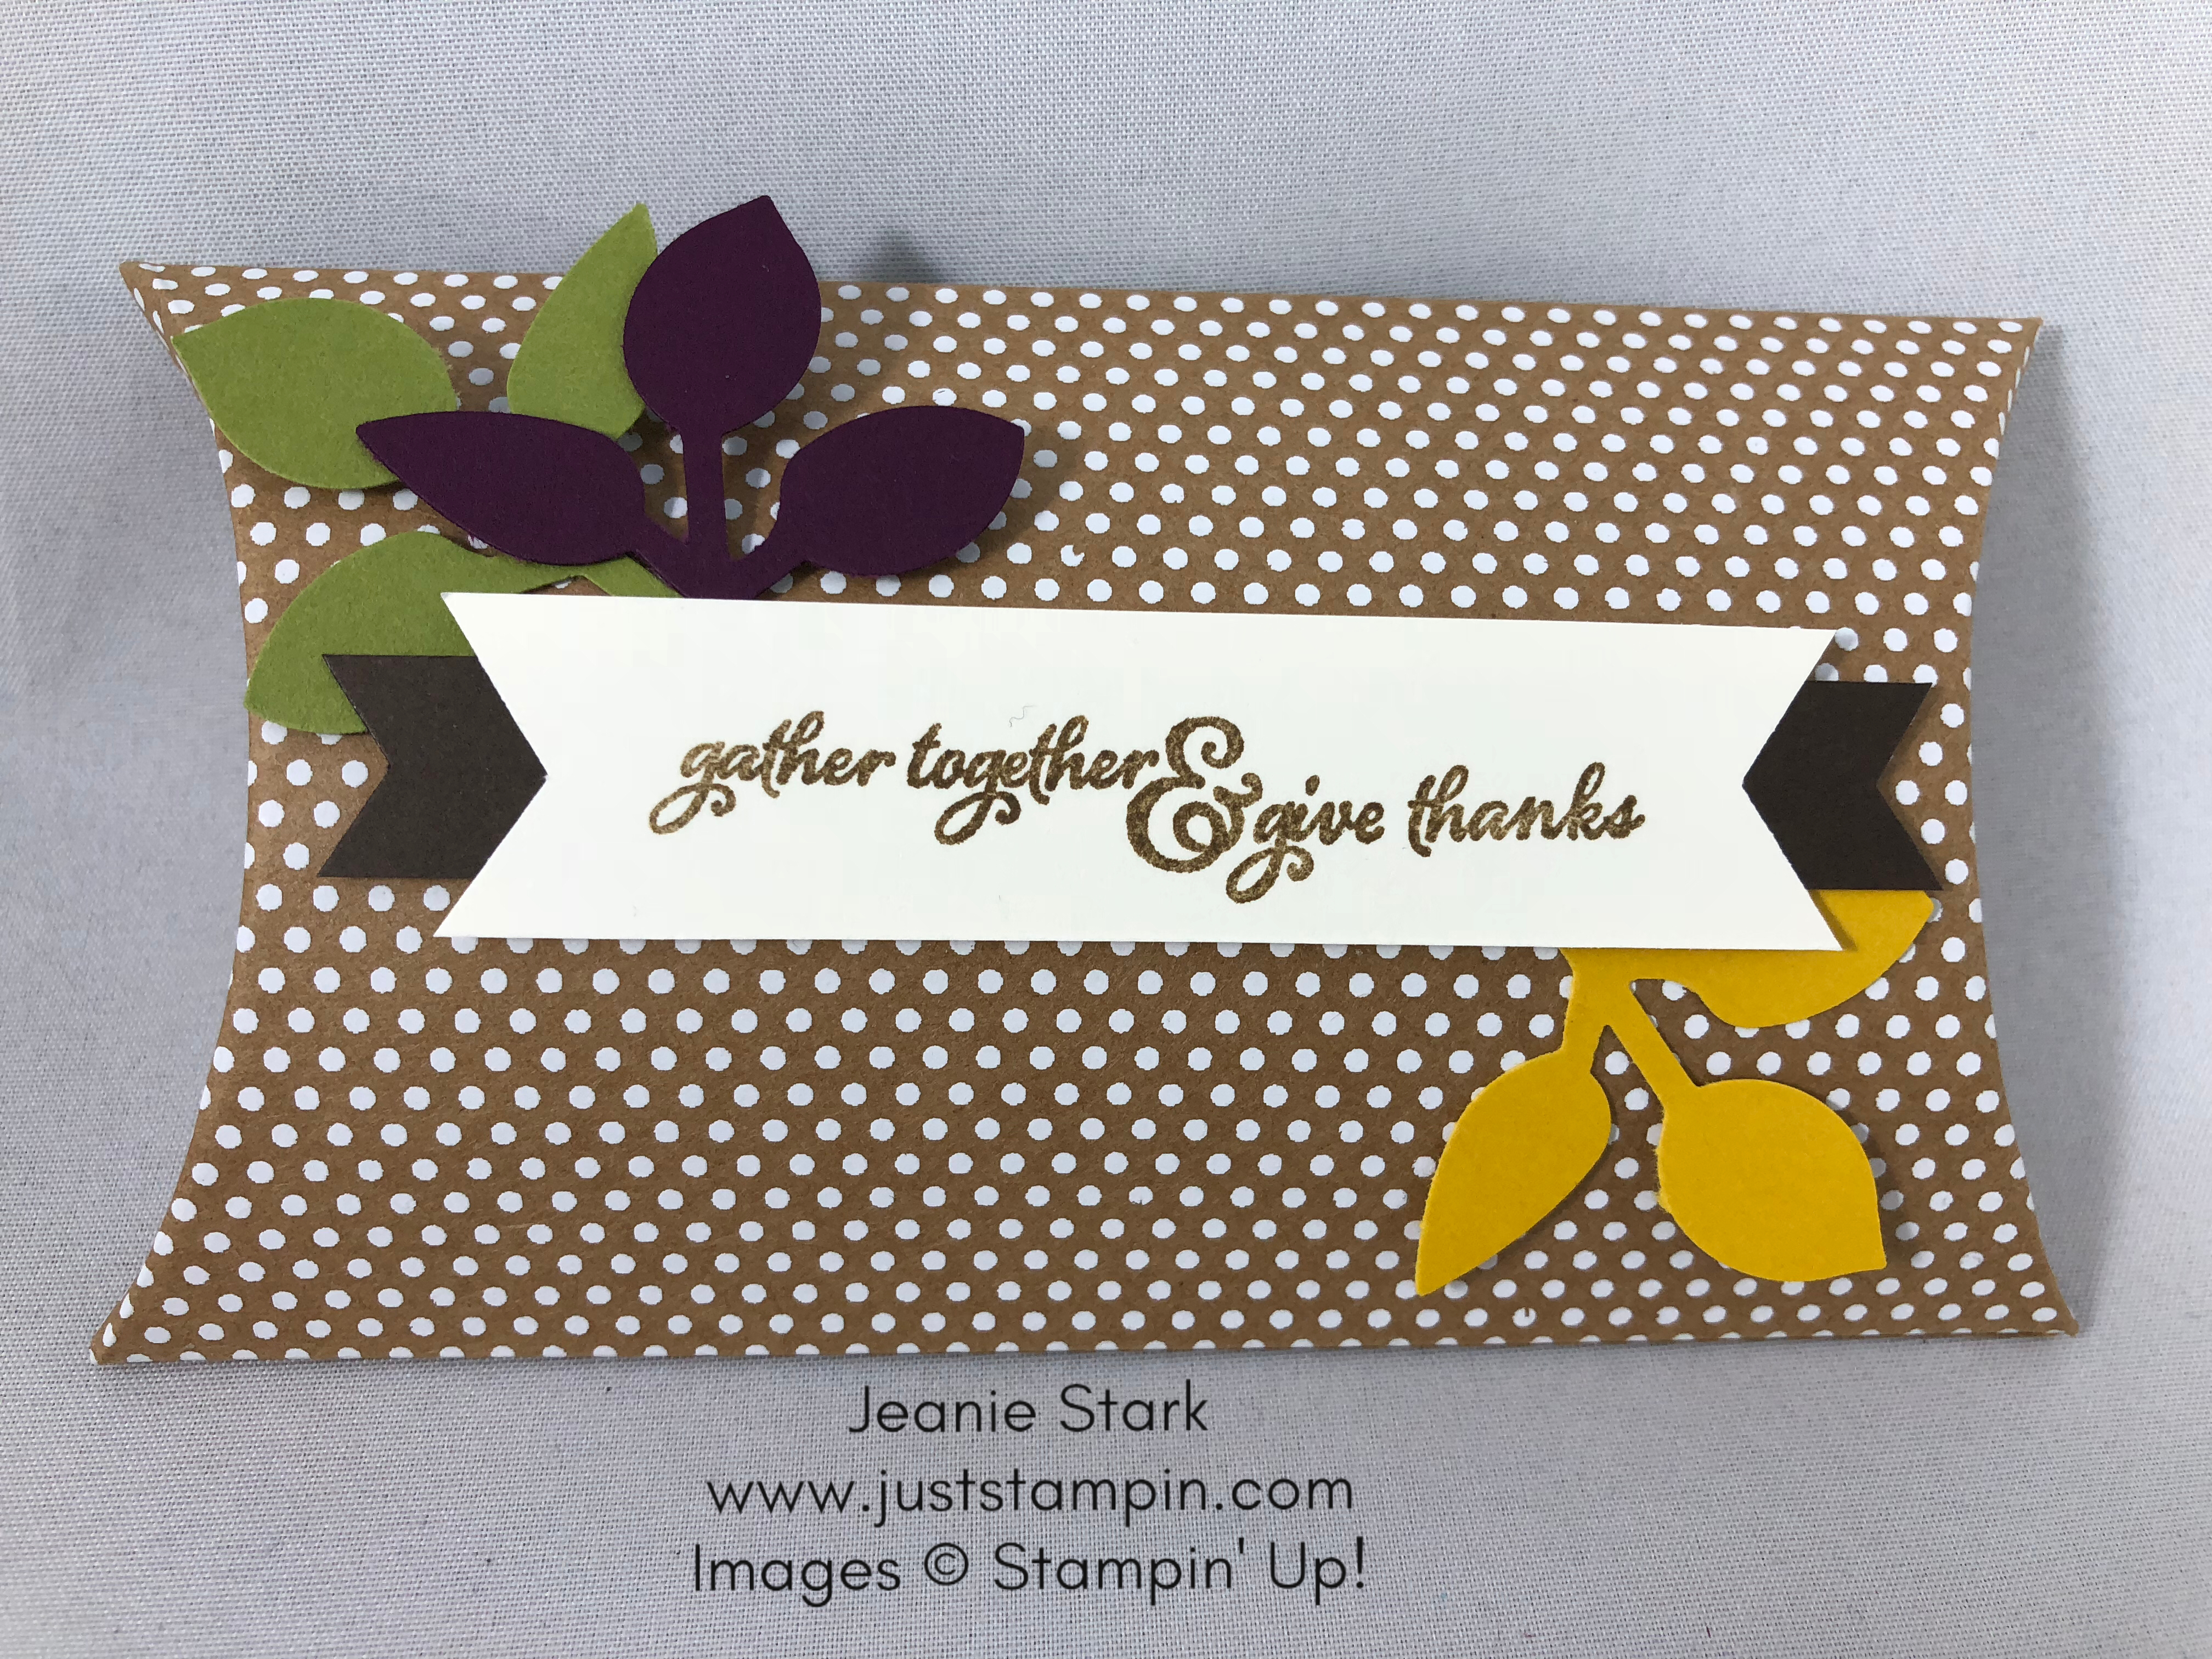 Stampin Up Pillow Boxes and Painted Harvest table favor idea - Jeanie Stark StampinUp